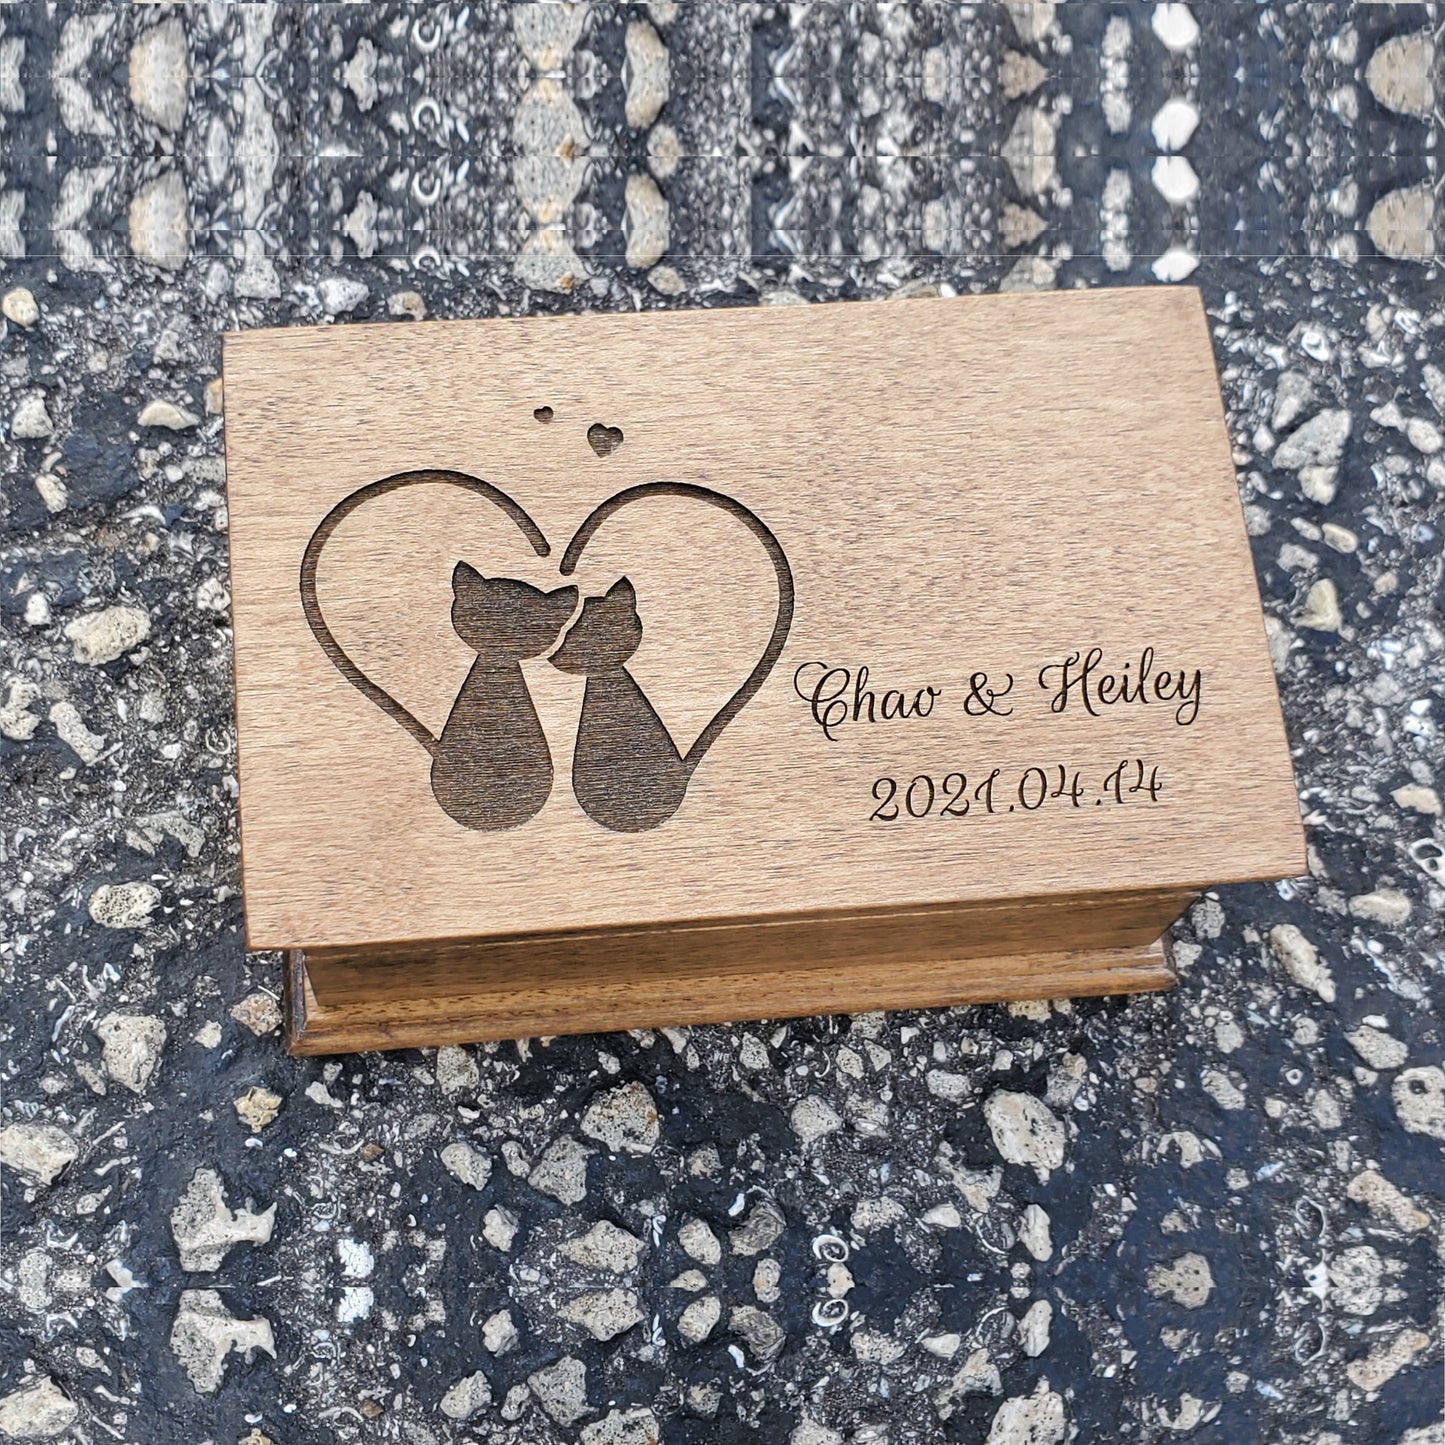 jewelry box with built in music player with 2 cats in a heart engraved on the top along with your names and date, perfect anniversary gift to your cat lover